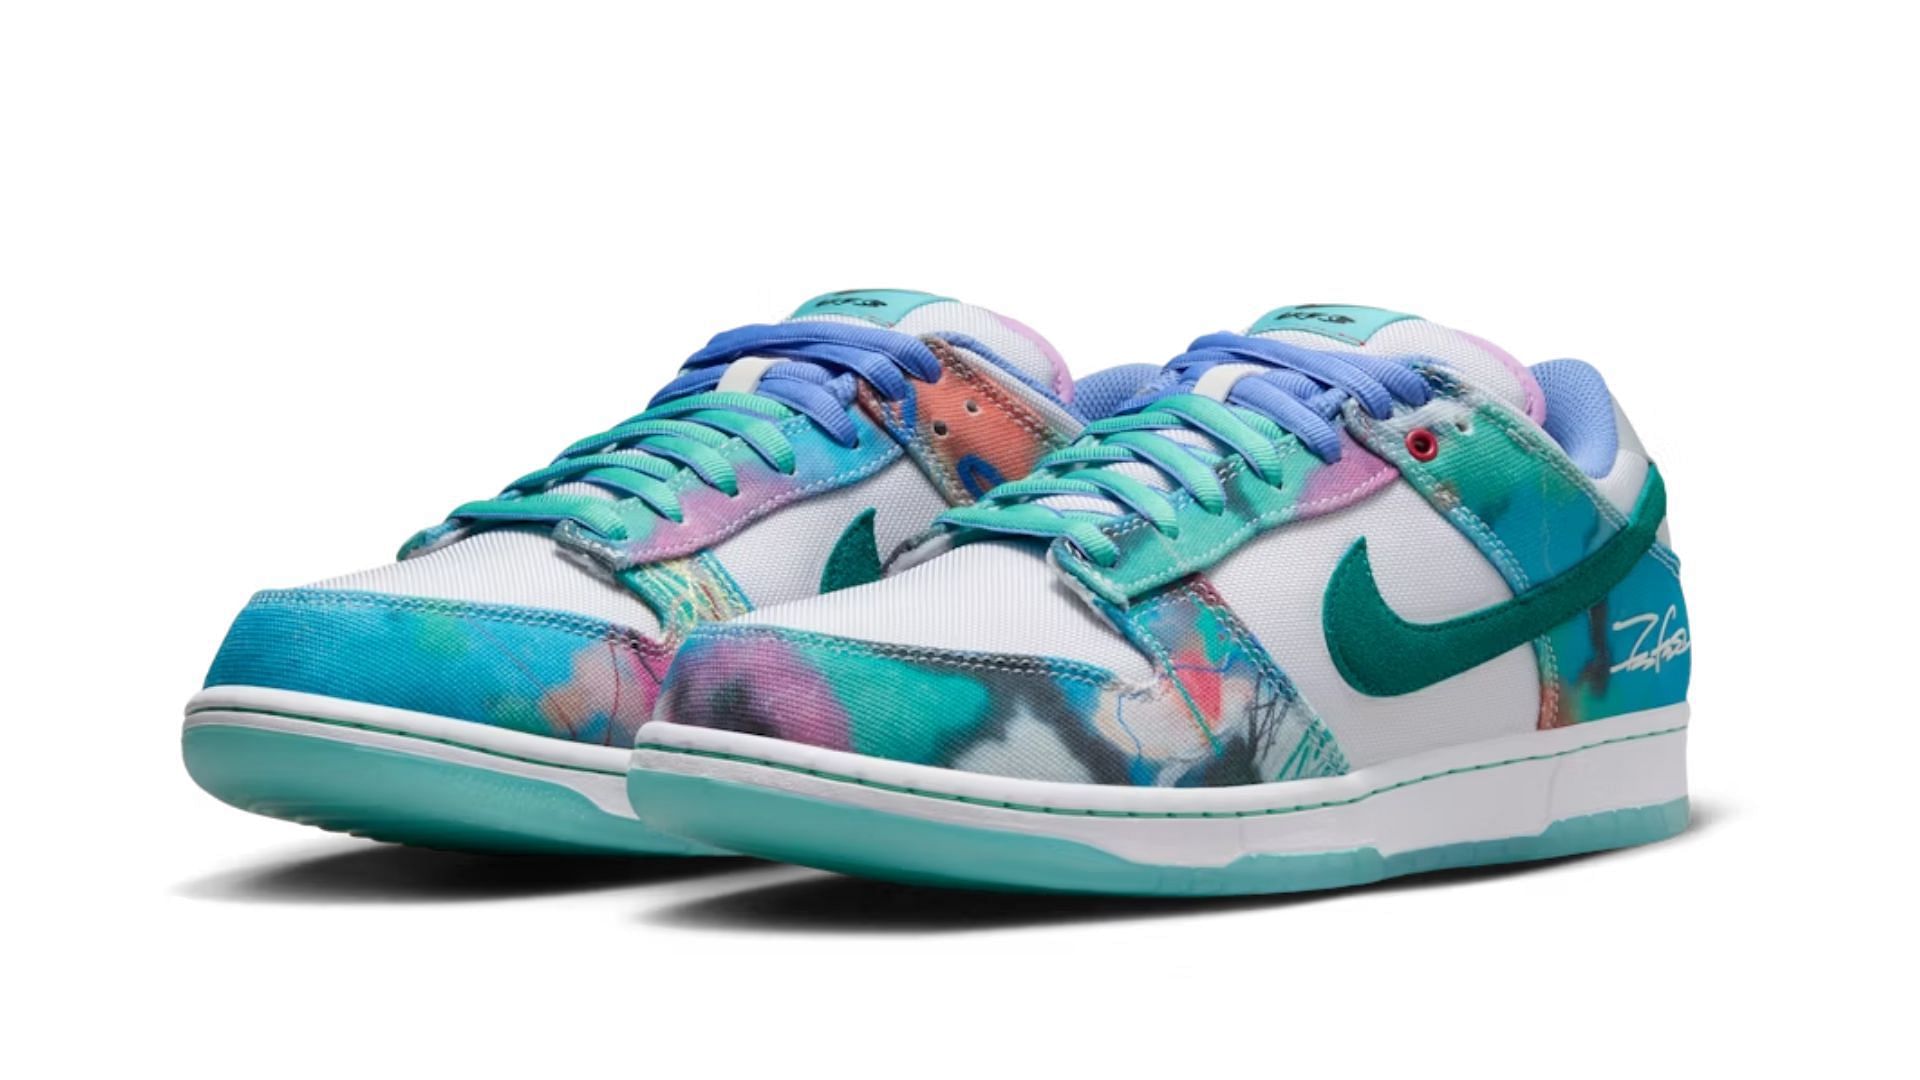 Futura x Nike SB Dunk Low officially launches